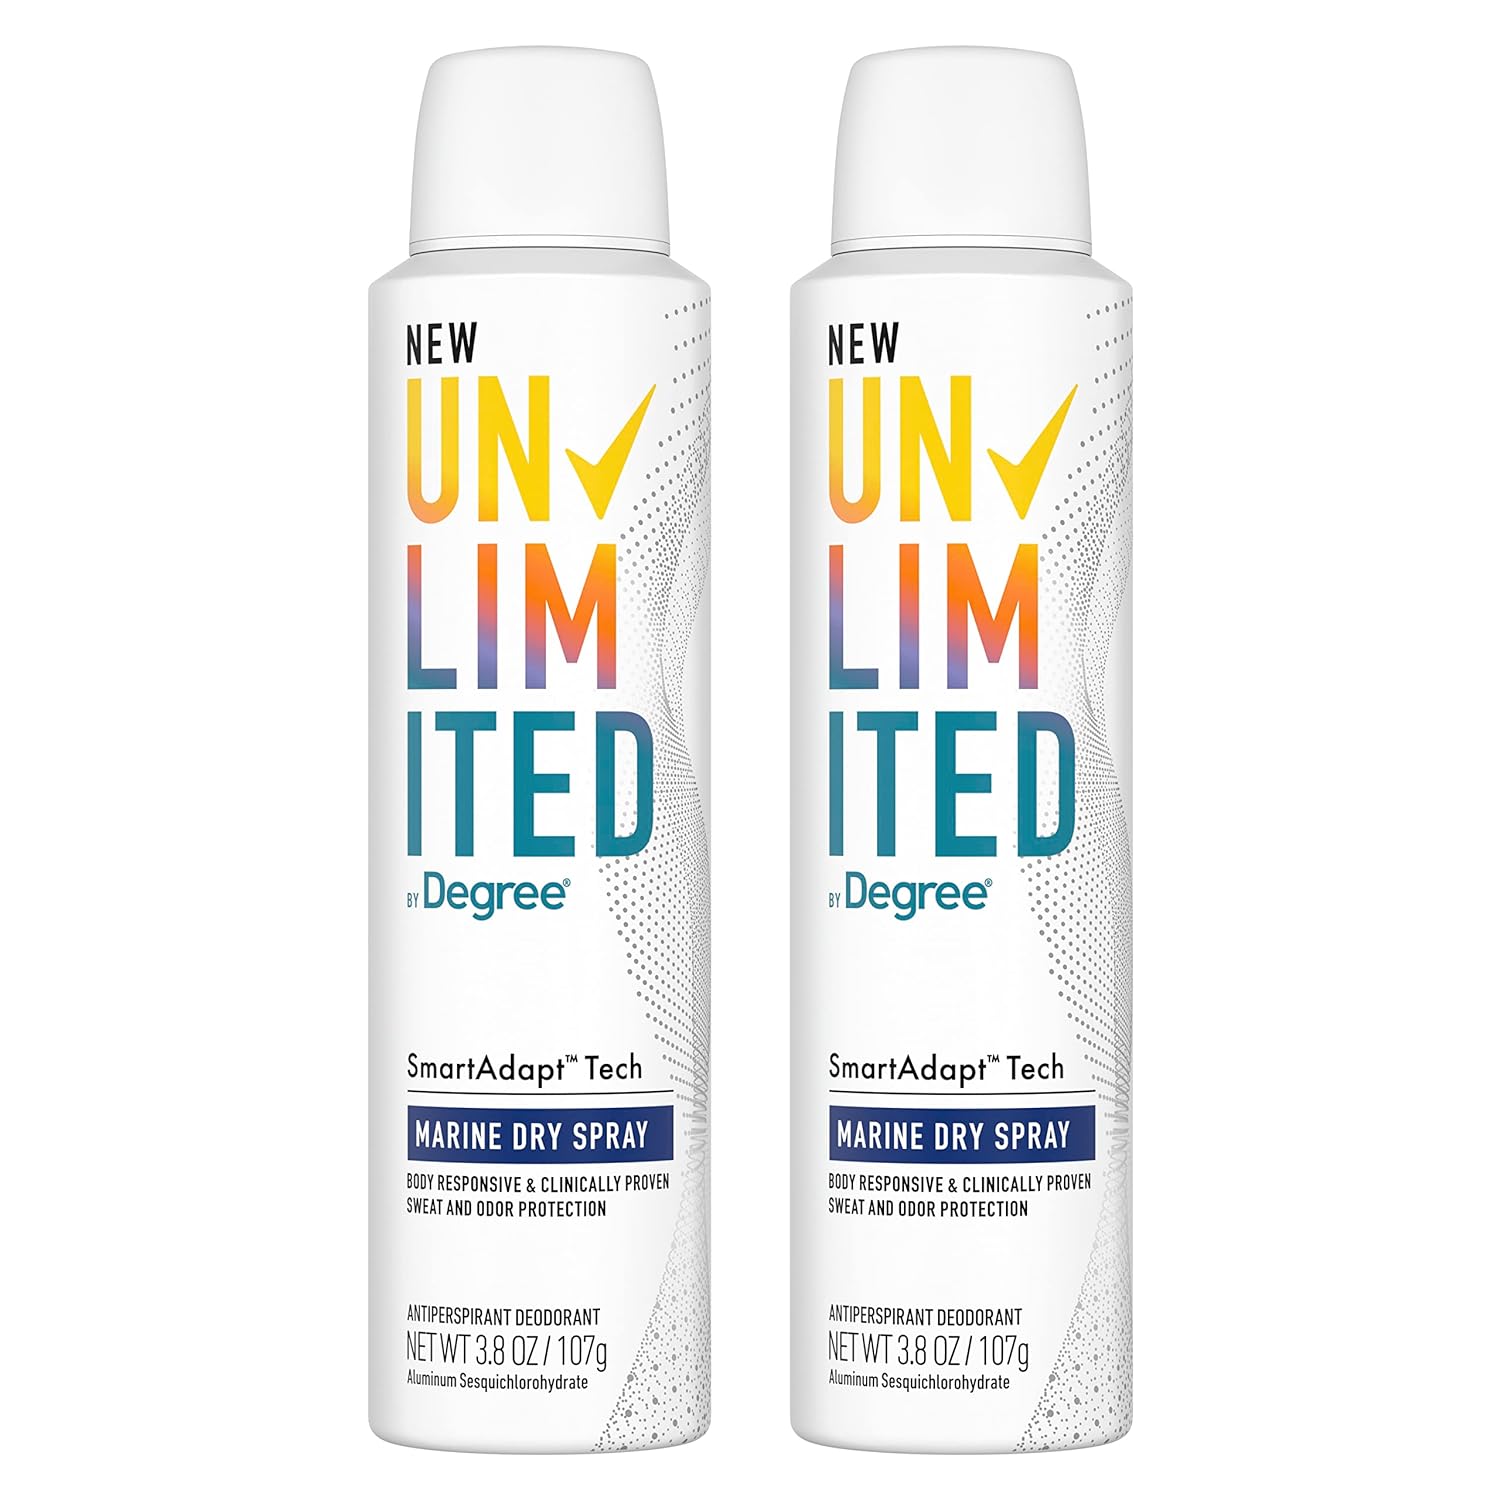 Degree Unlimited Antiperspirant Deodorant Dry Spray Marine 2 Count Long-Lasting Sweat & Odor Protection with Antiperspirant Technology SmartAdapt Tech 3.8 oz